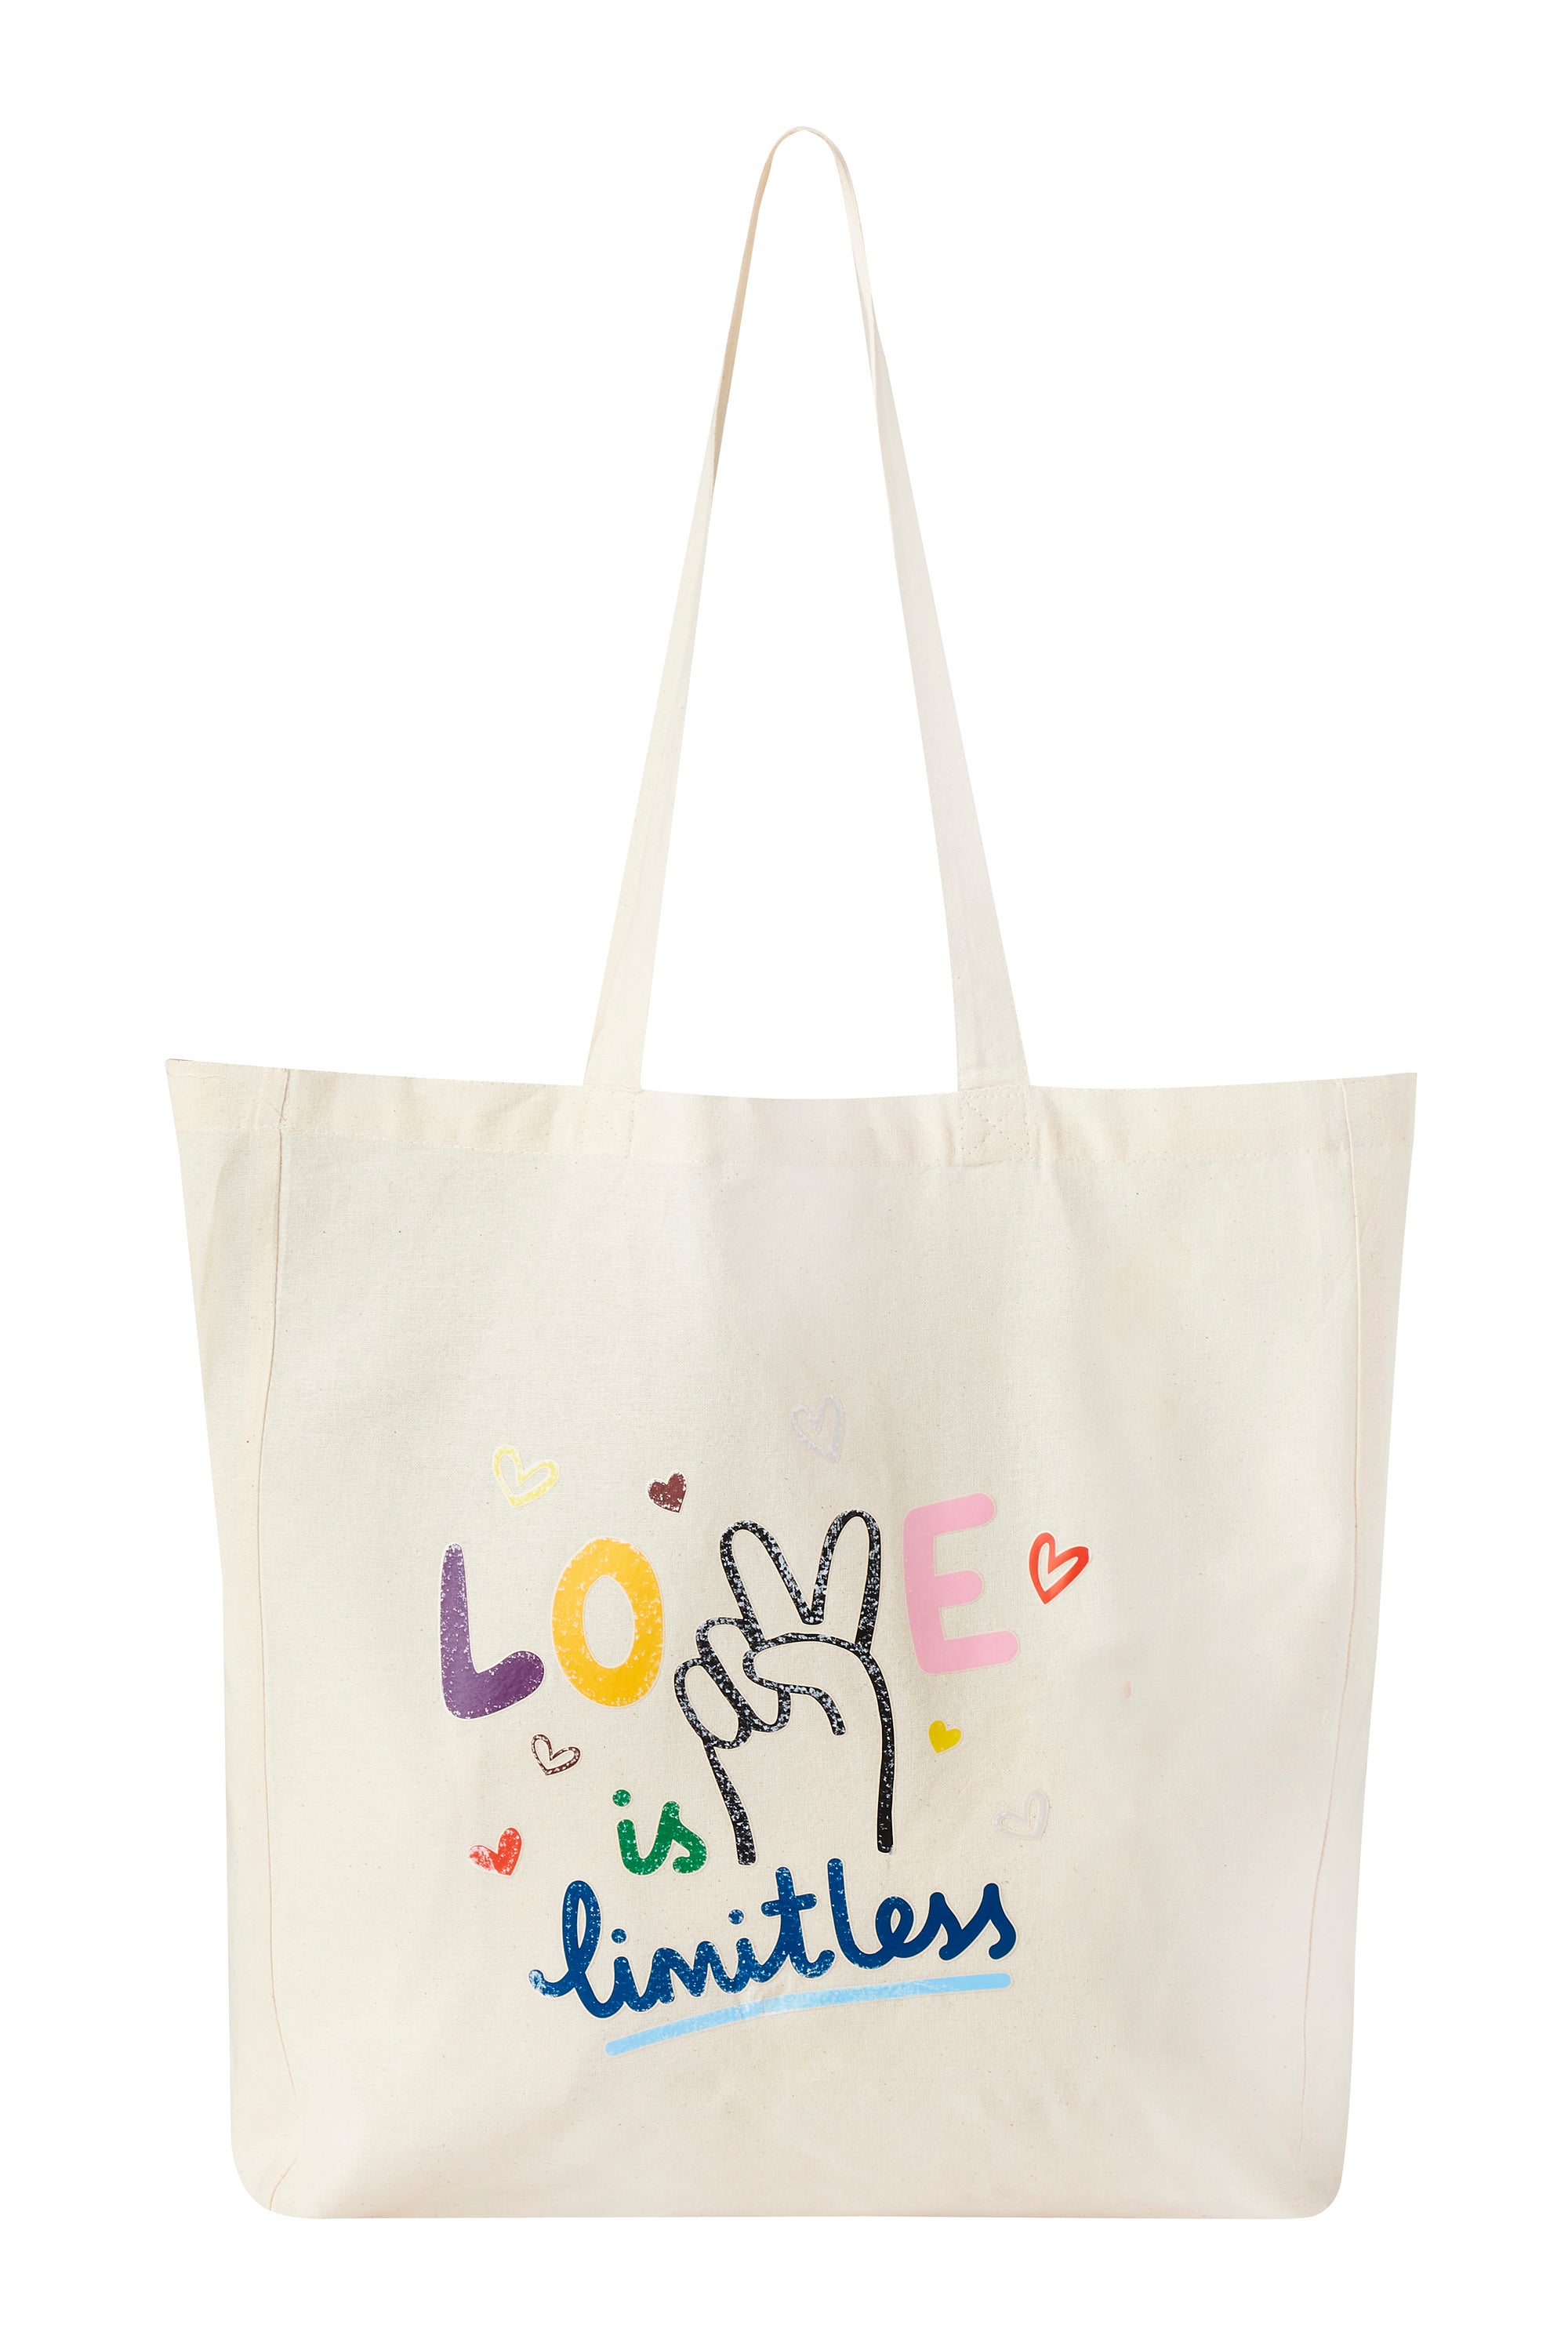 Matalan X NSPCC Love is Limitless Pride Bag For Life